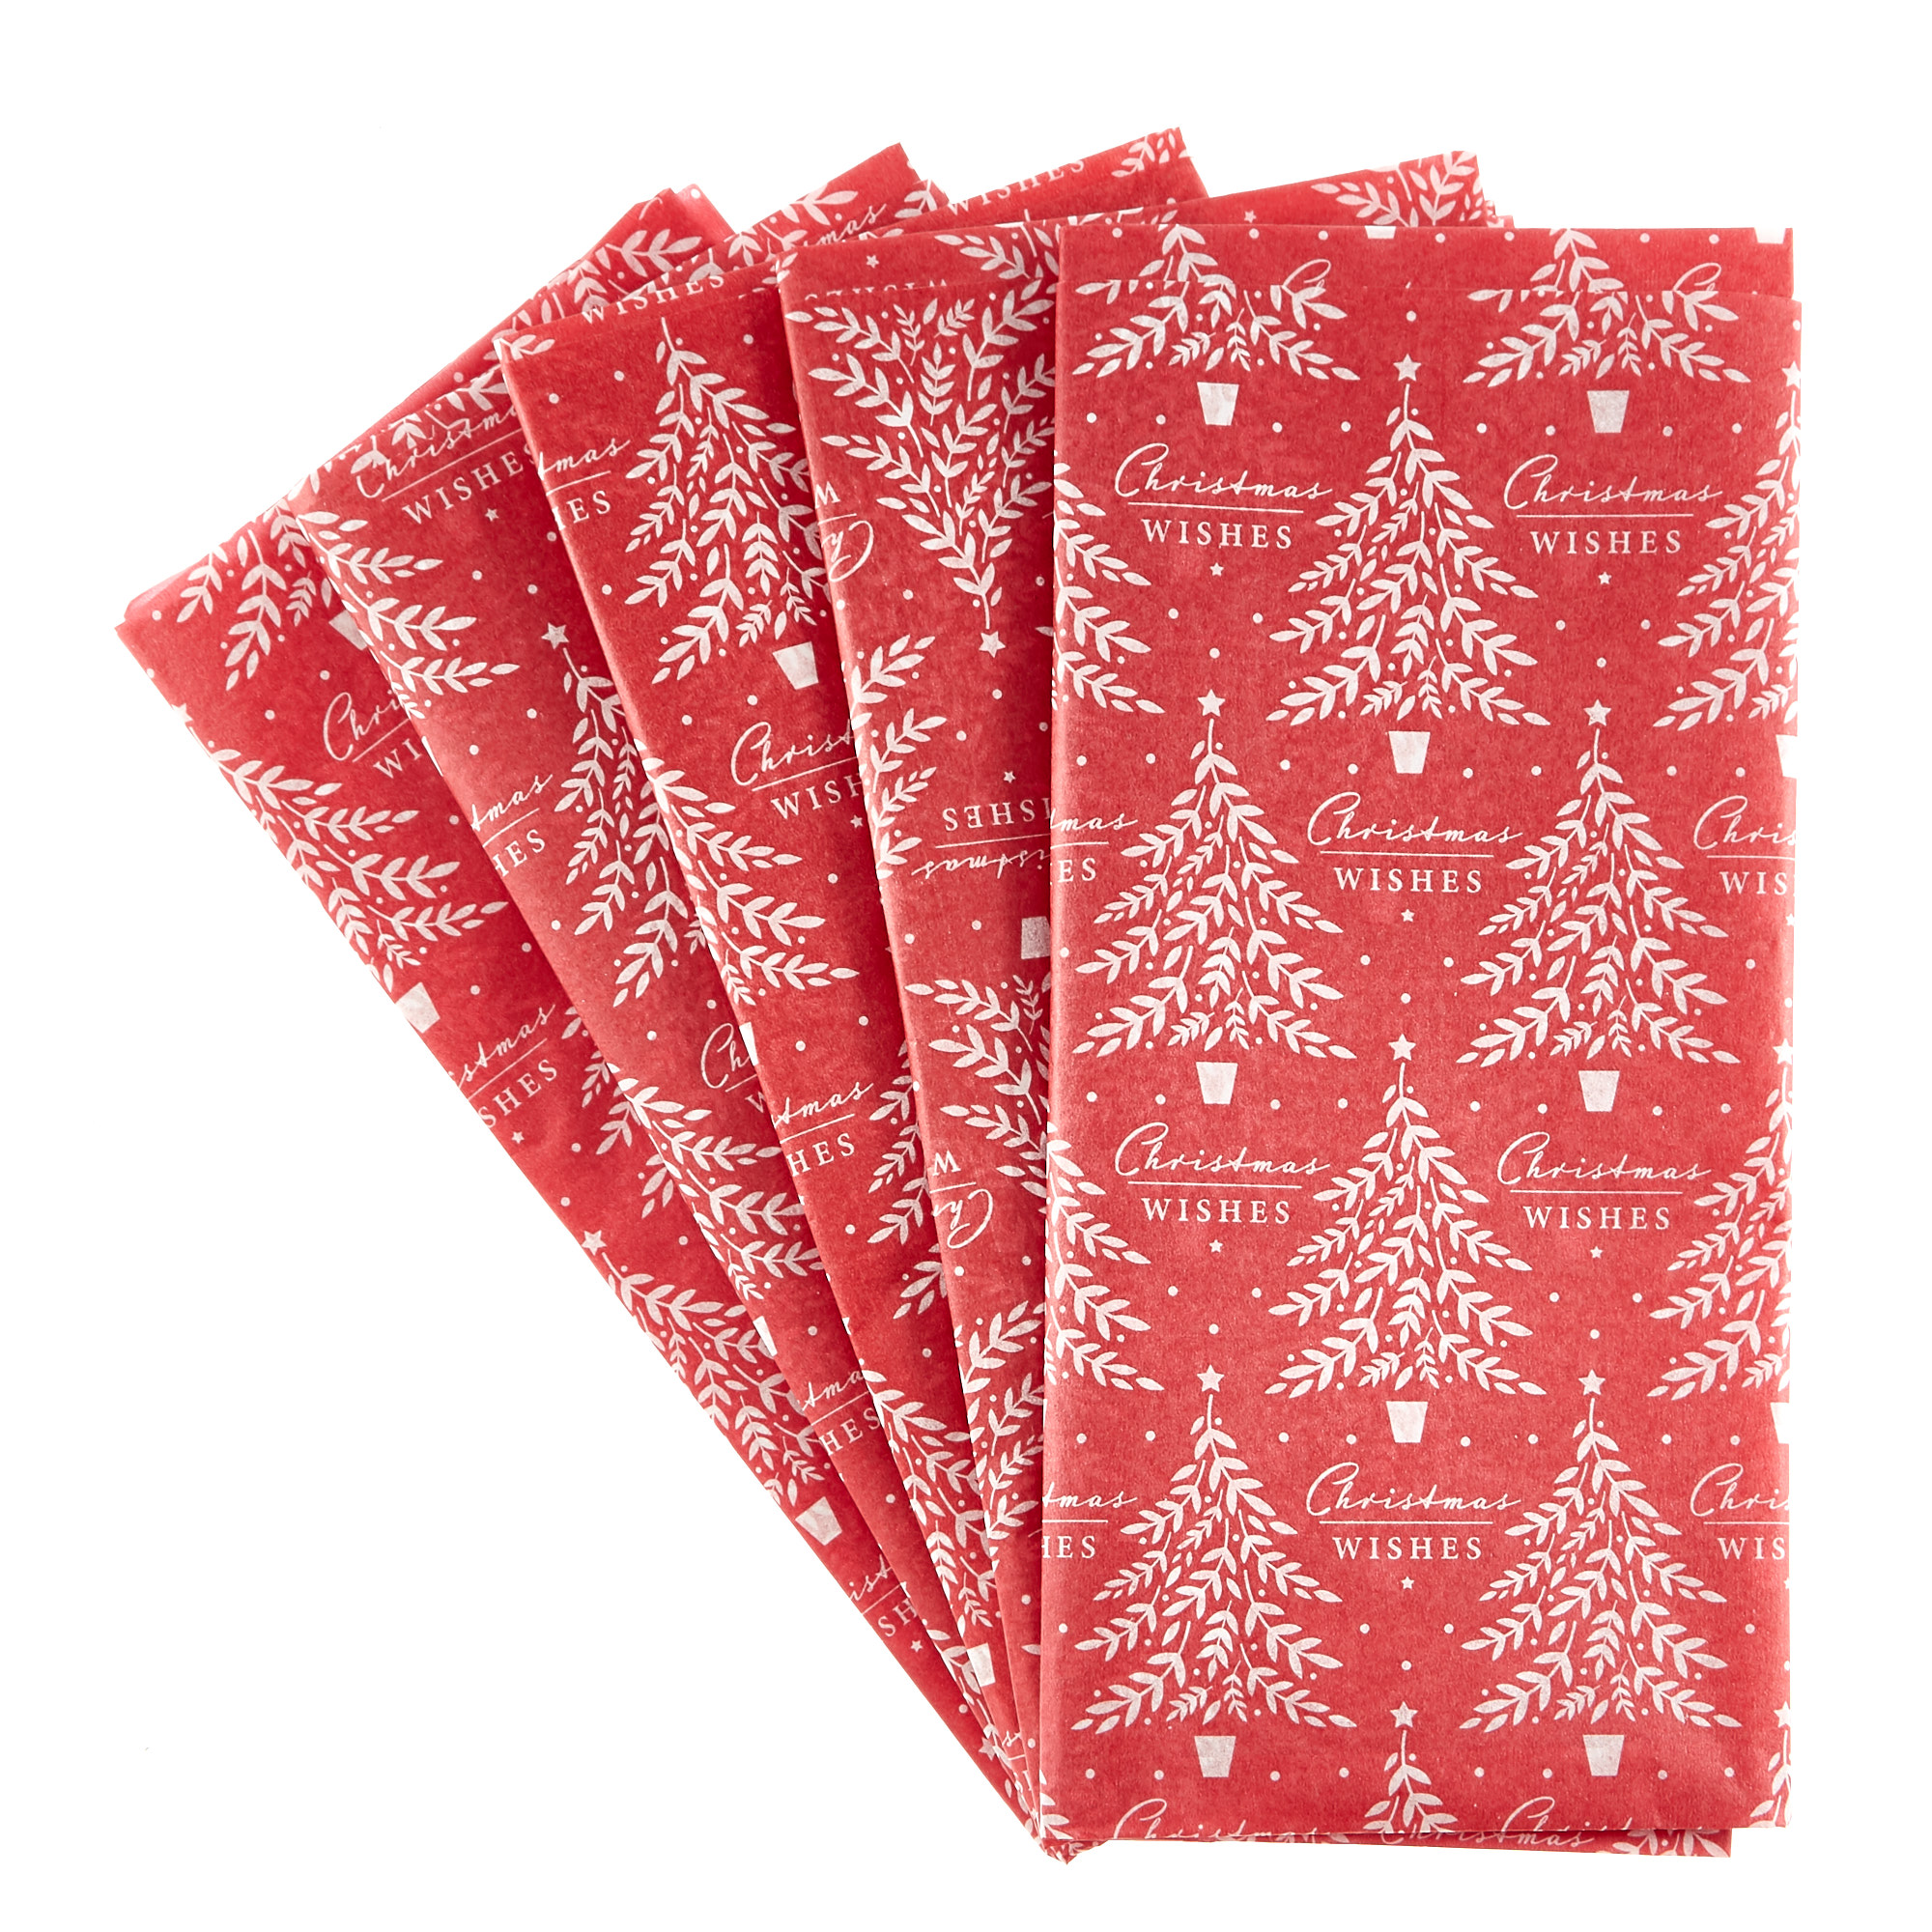 Red & White Christmas Wishes Tissue Paper - 7 Sheets 